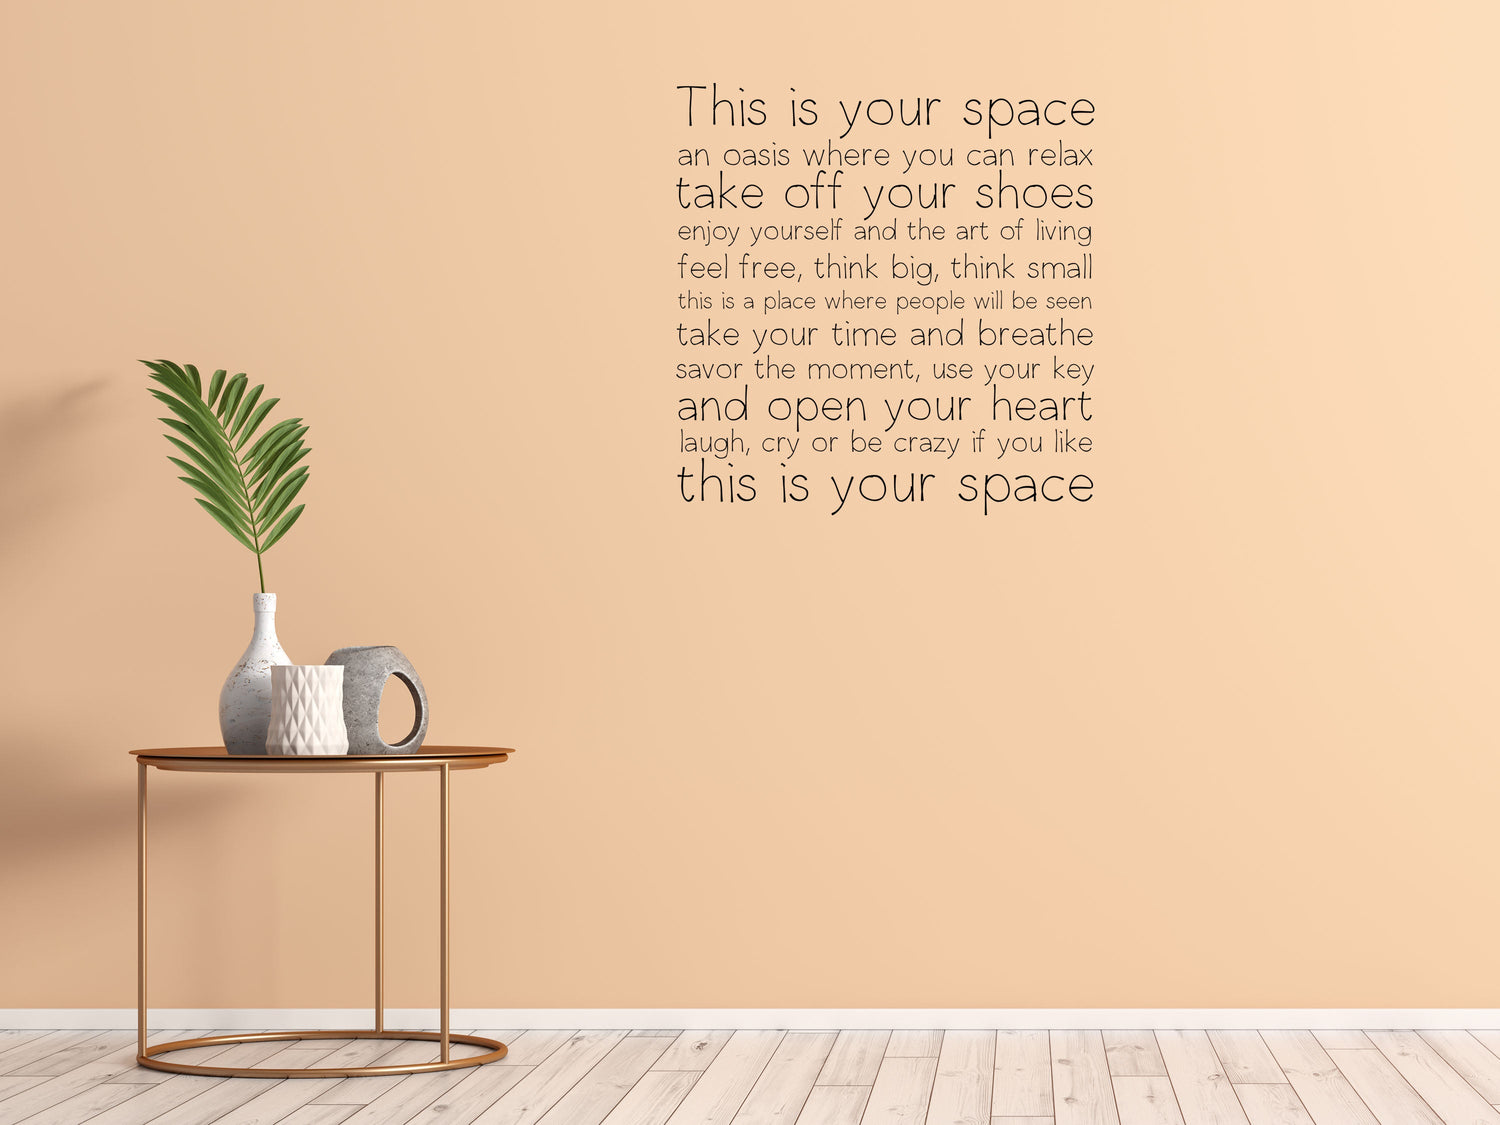 This Is Your Space - Inspirational Wall Signs Vinyl Wall Decal Inspirational Wall Signs 